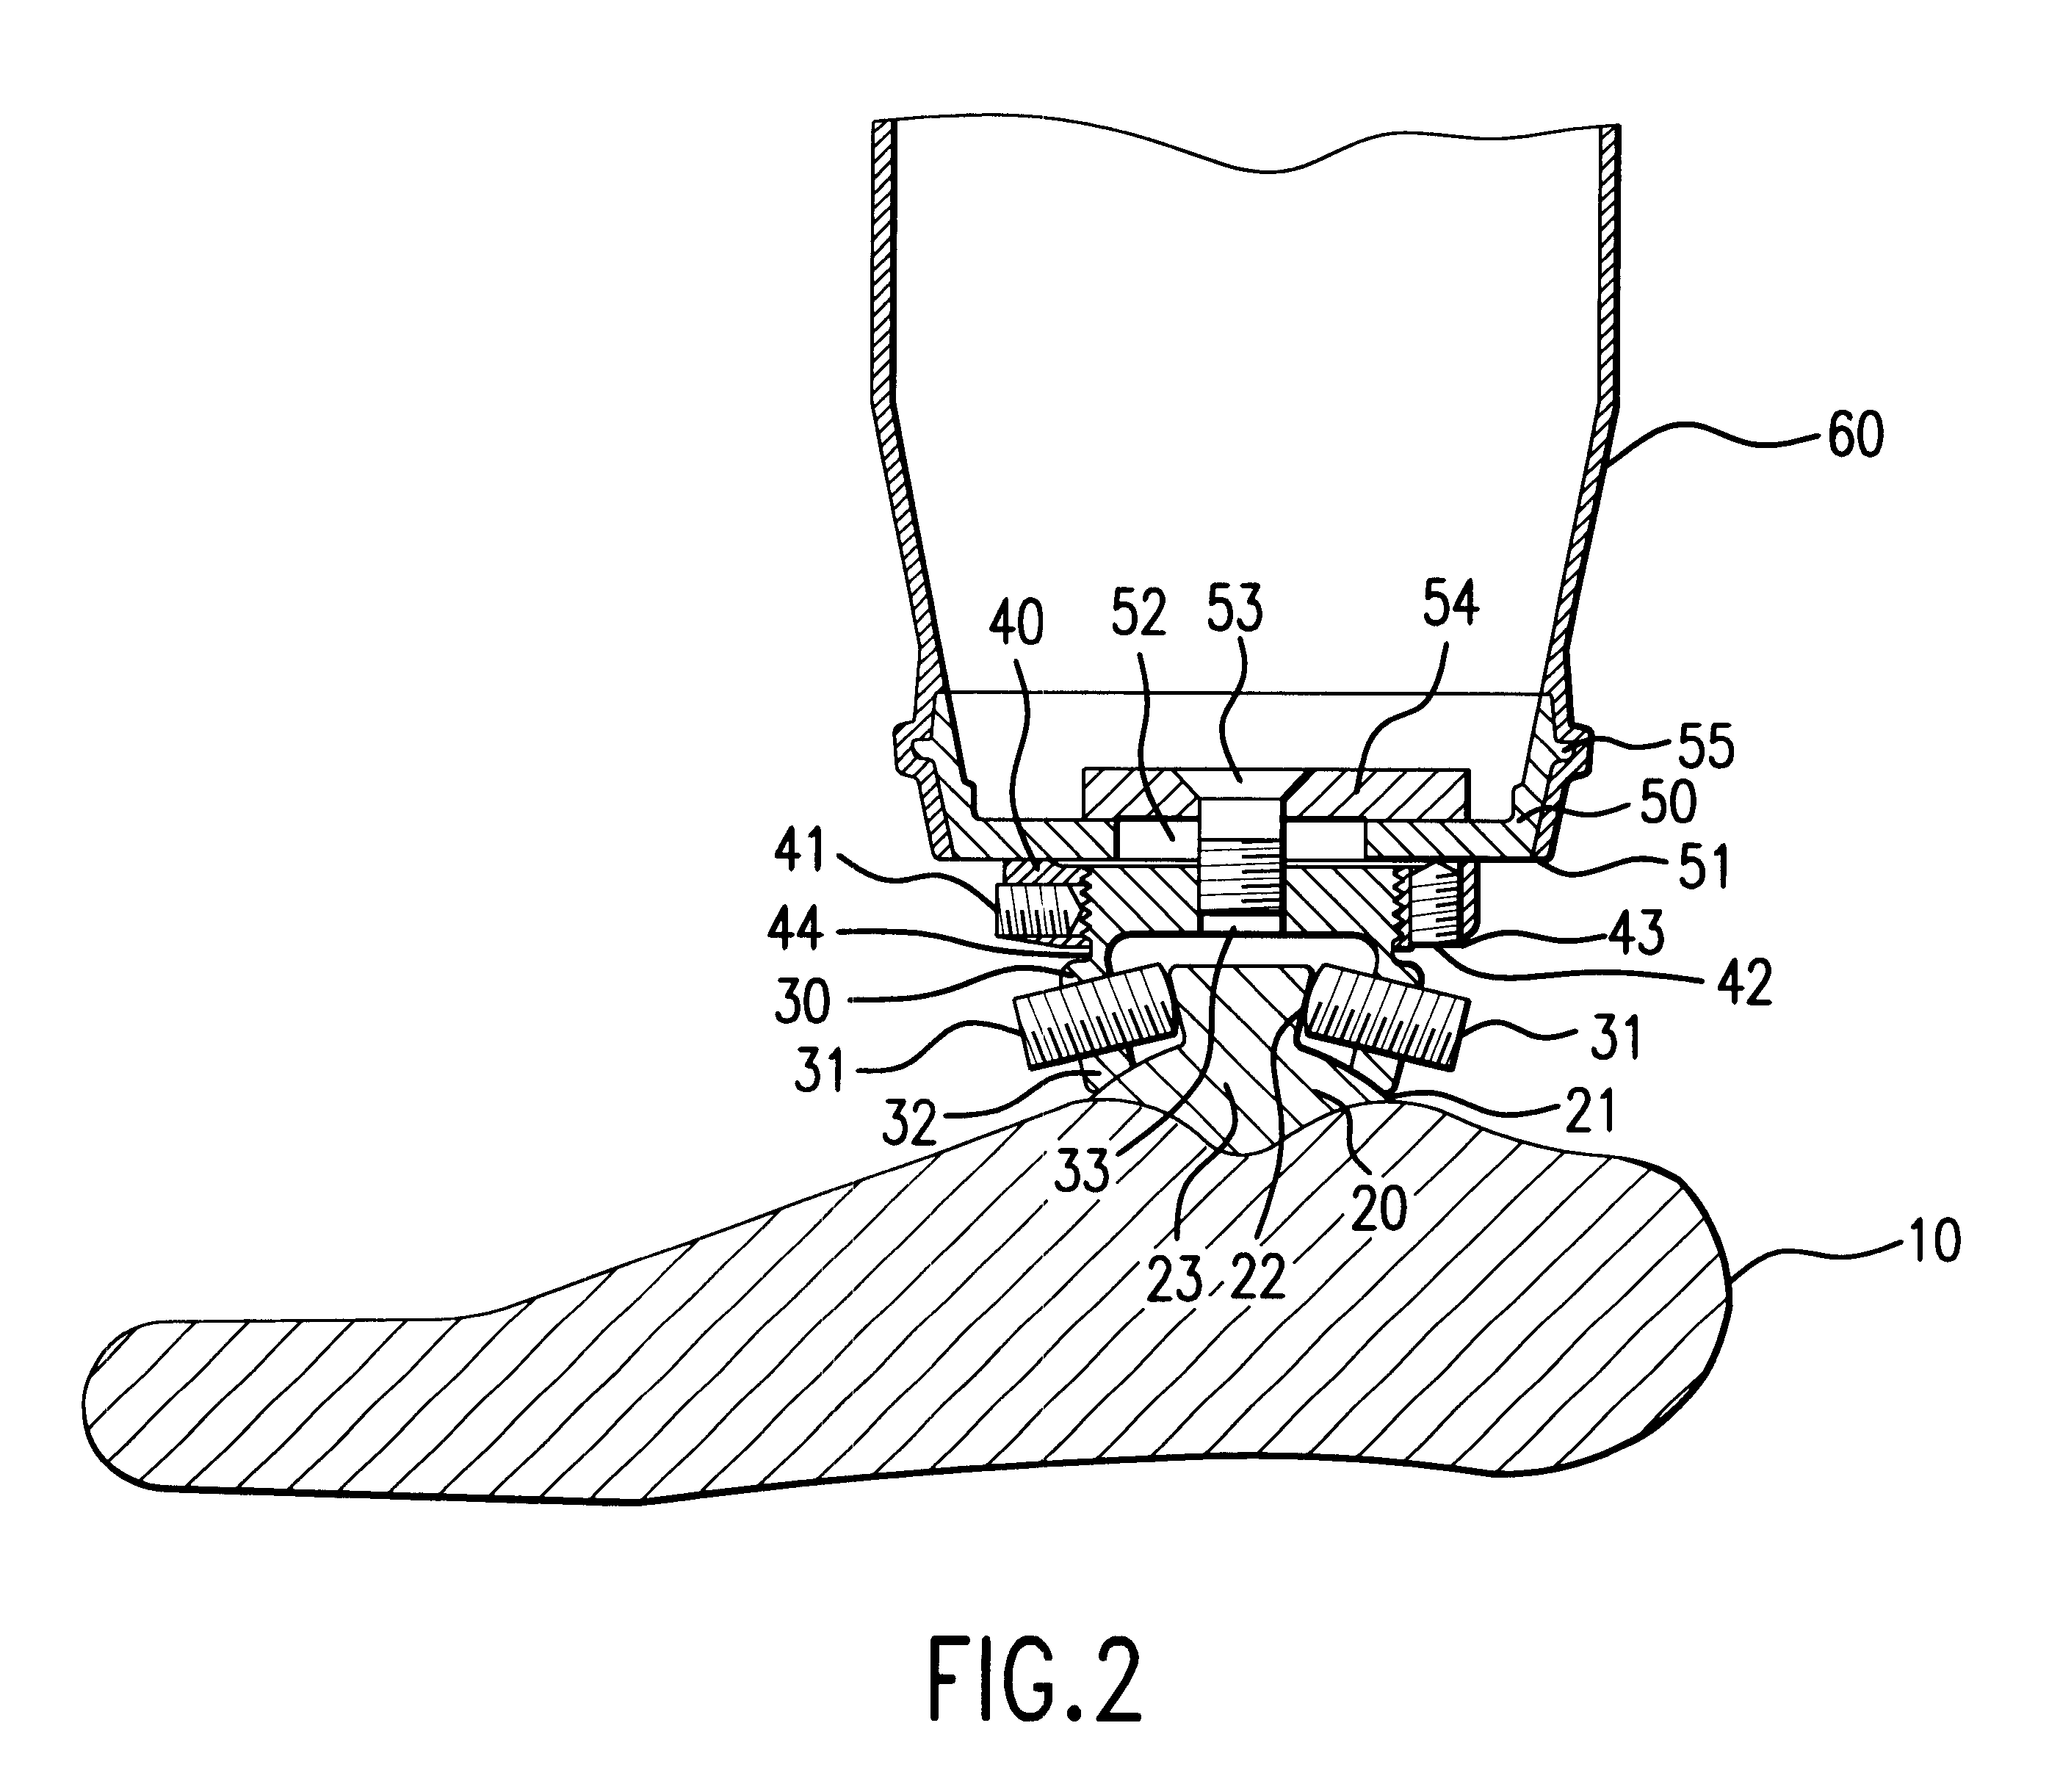 Locking device for a prothesis